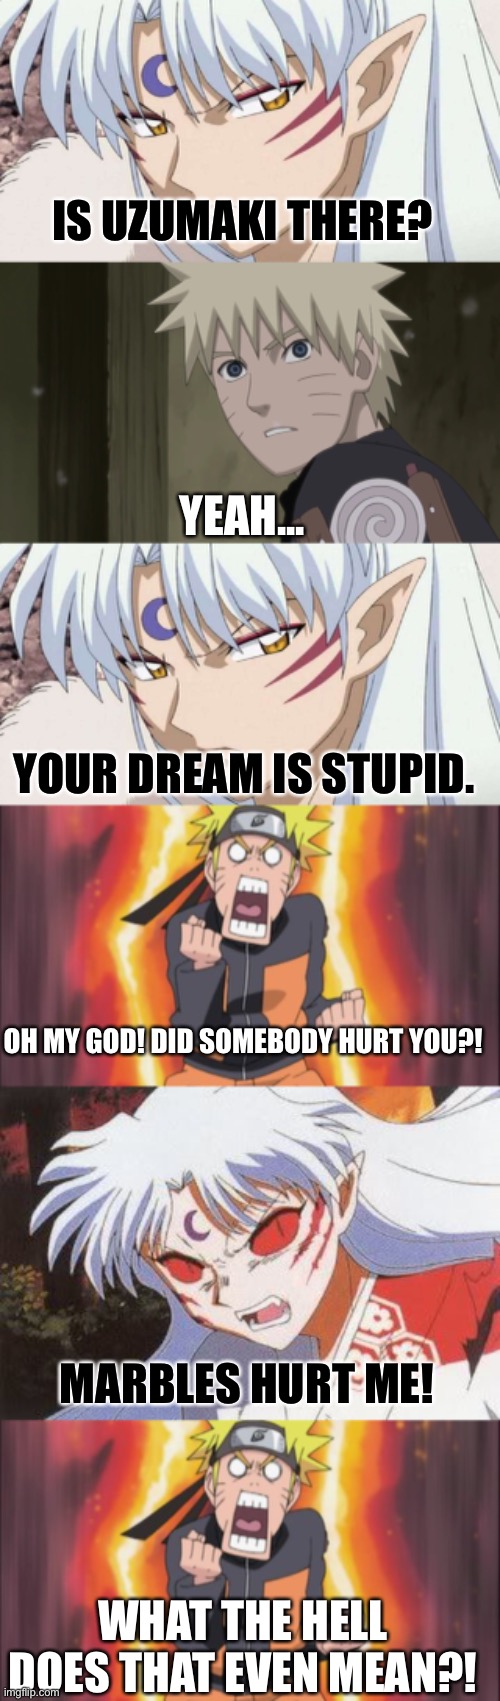 Low effort meme works | IS UZUMAKI THERE? YEAH... YOUR DREAM IS STUPID. OH MY GOD! DID SOMEBODY HURT YOU?! MARBLES HURT ME! WHAT THE HELL DOES THAT EVEN MEAN?! | image tagged in naruto,inuyasha,sesshomaru,unlimited blade works abridged,crossover,funny | made w/ Imgflip meme maker